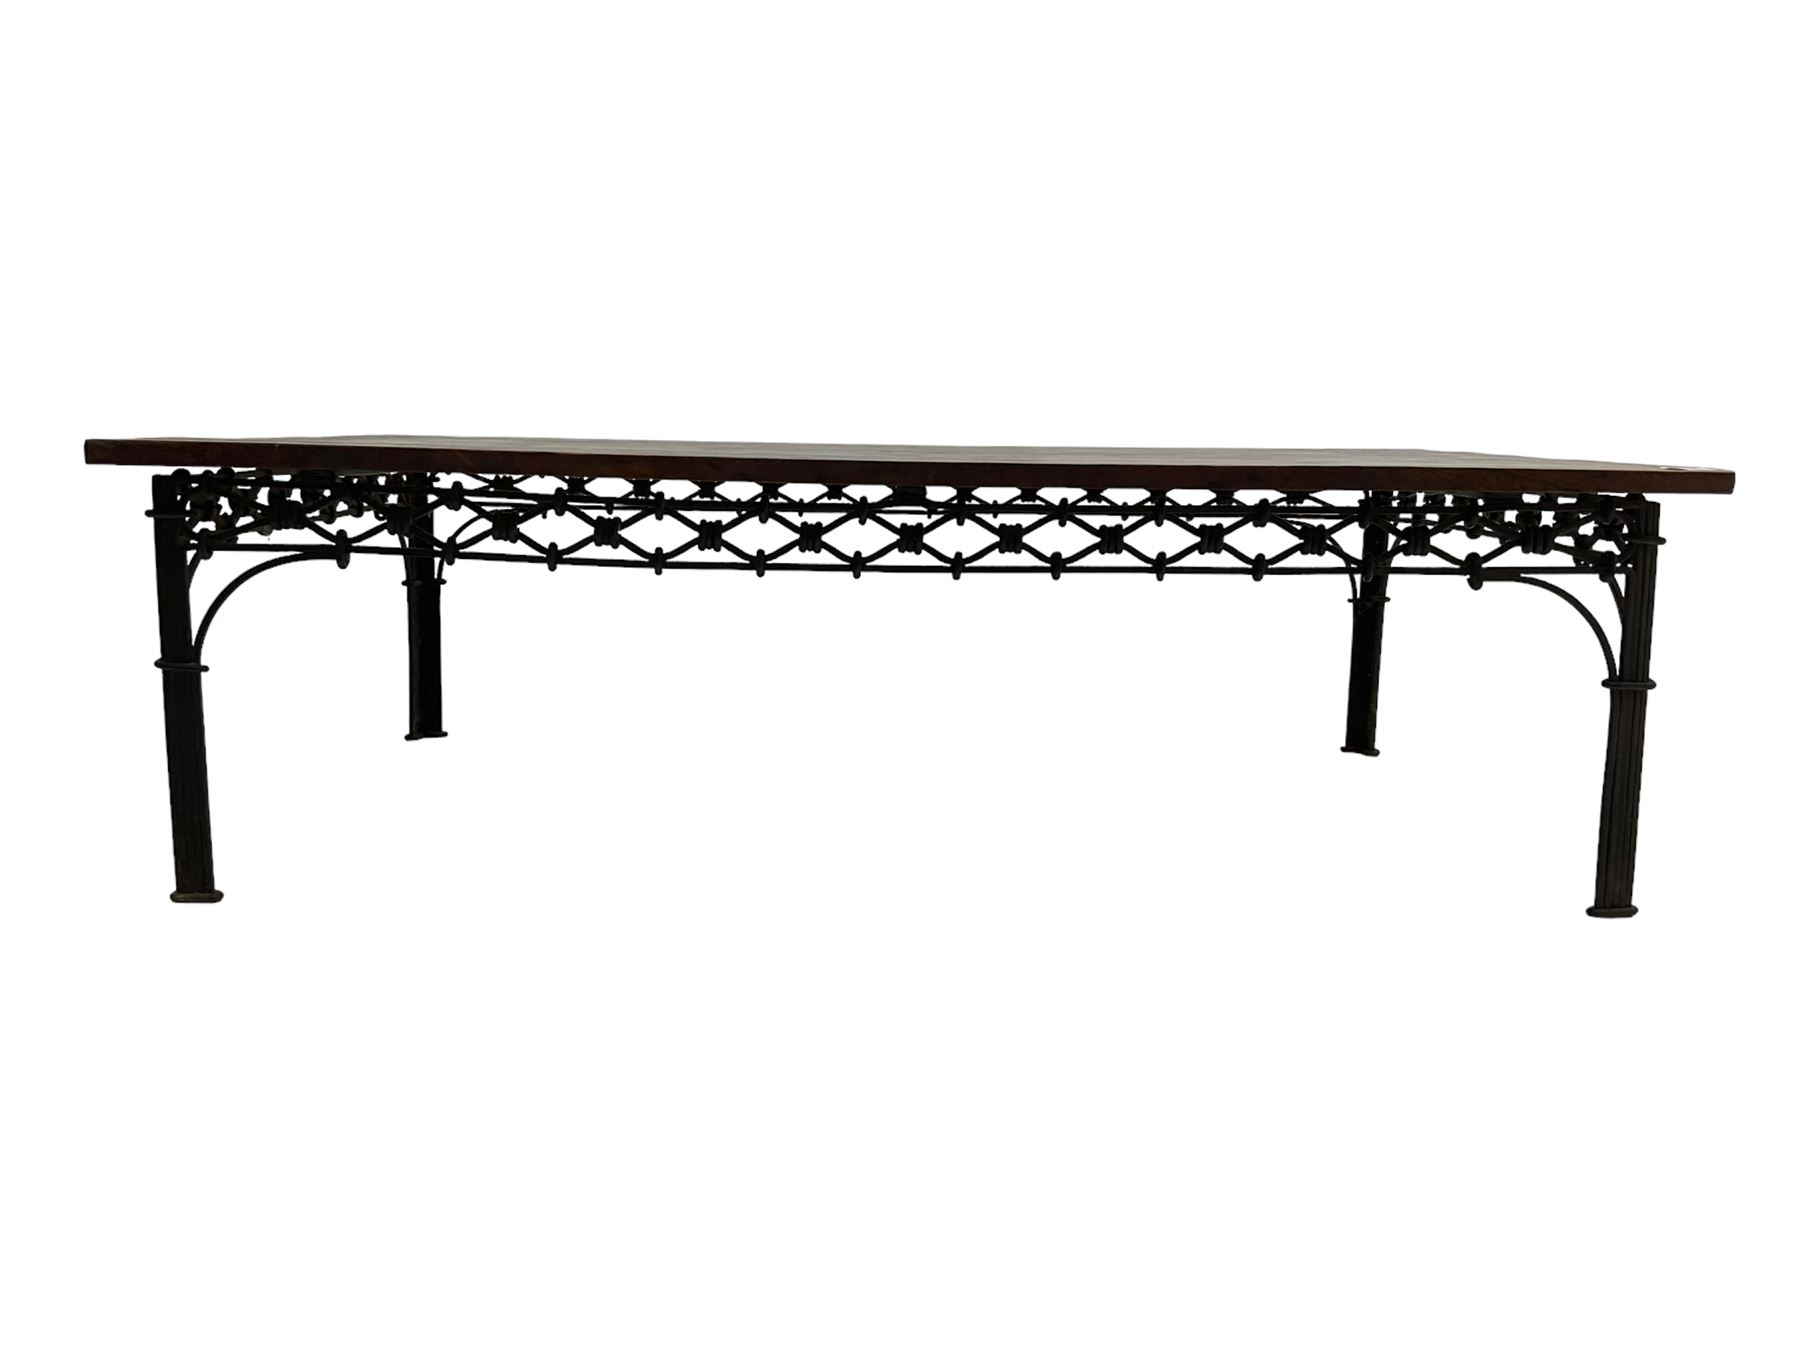 Laura Ashley - mango wood and wrought iron coffee table - Image 2 of 8